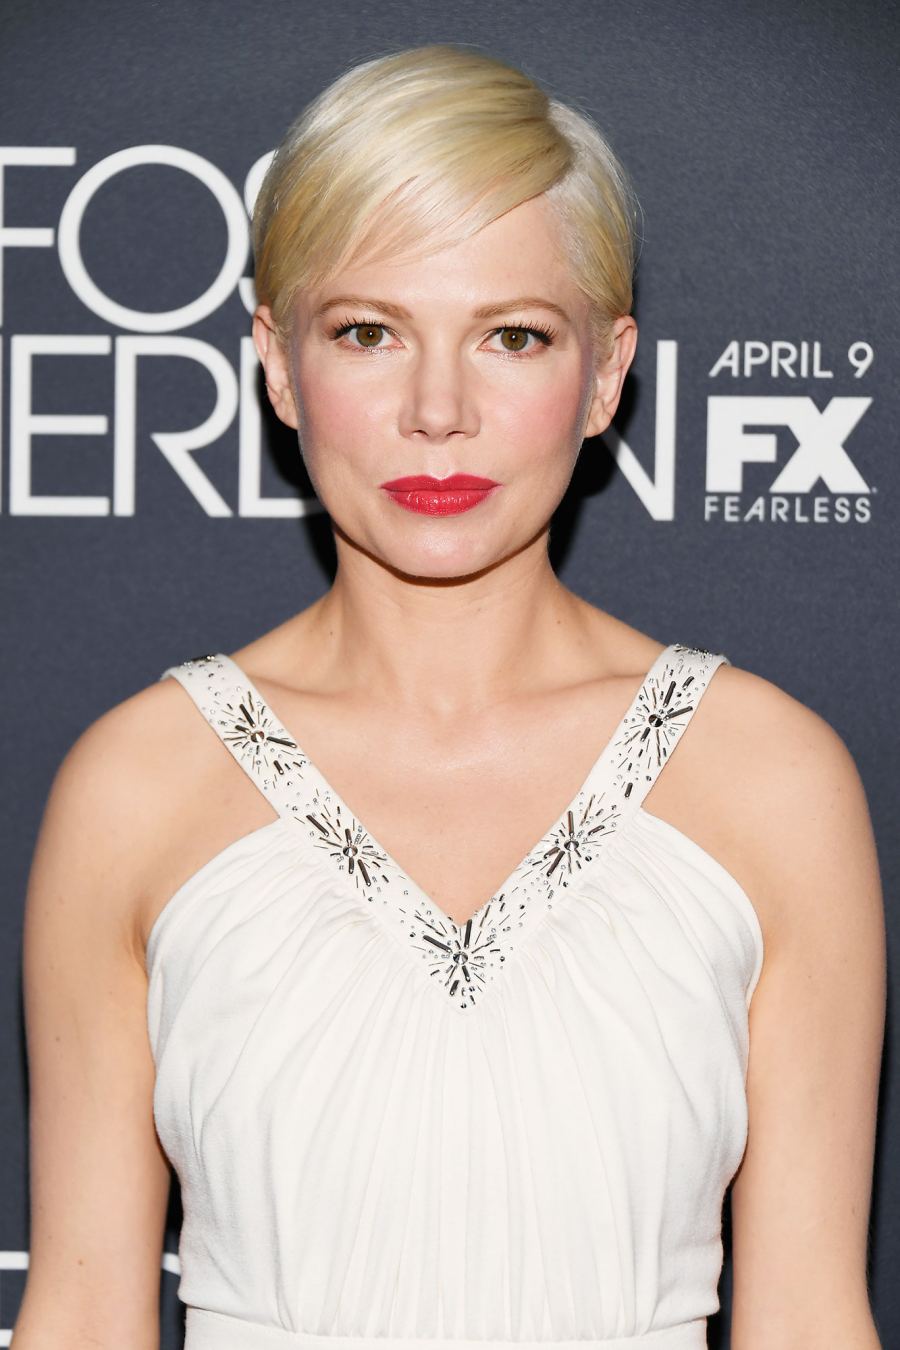 Michelle Williams’ Peachy-Pink Pout